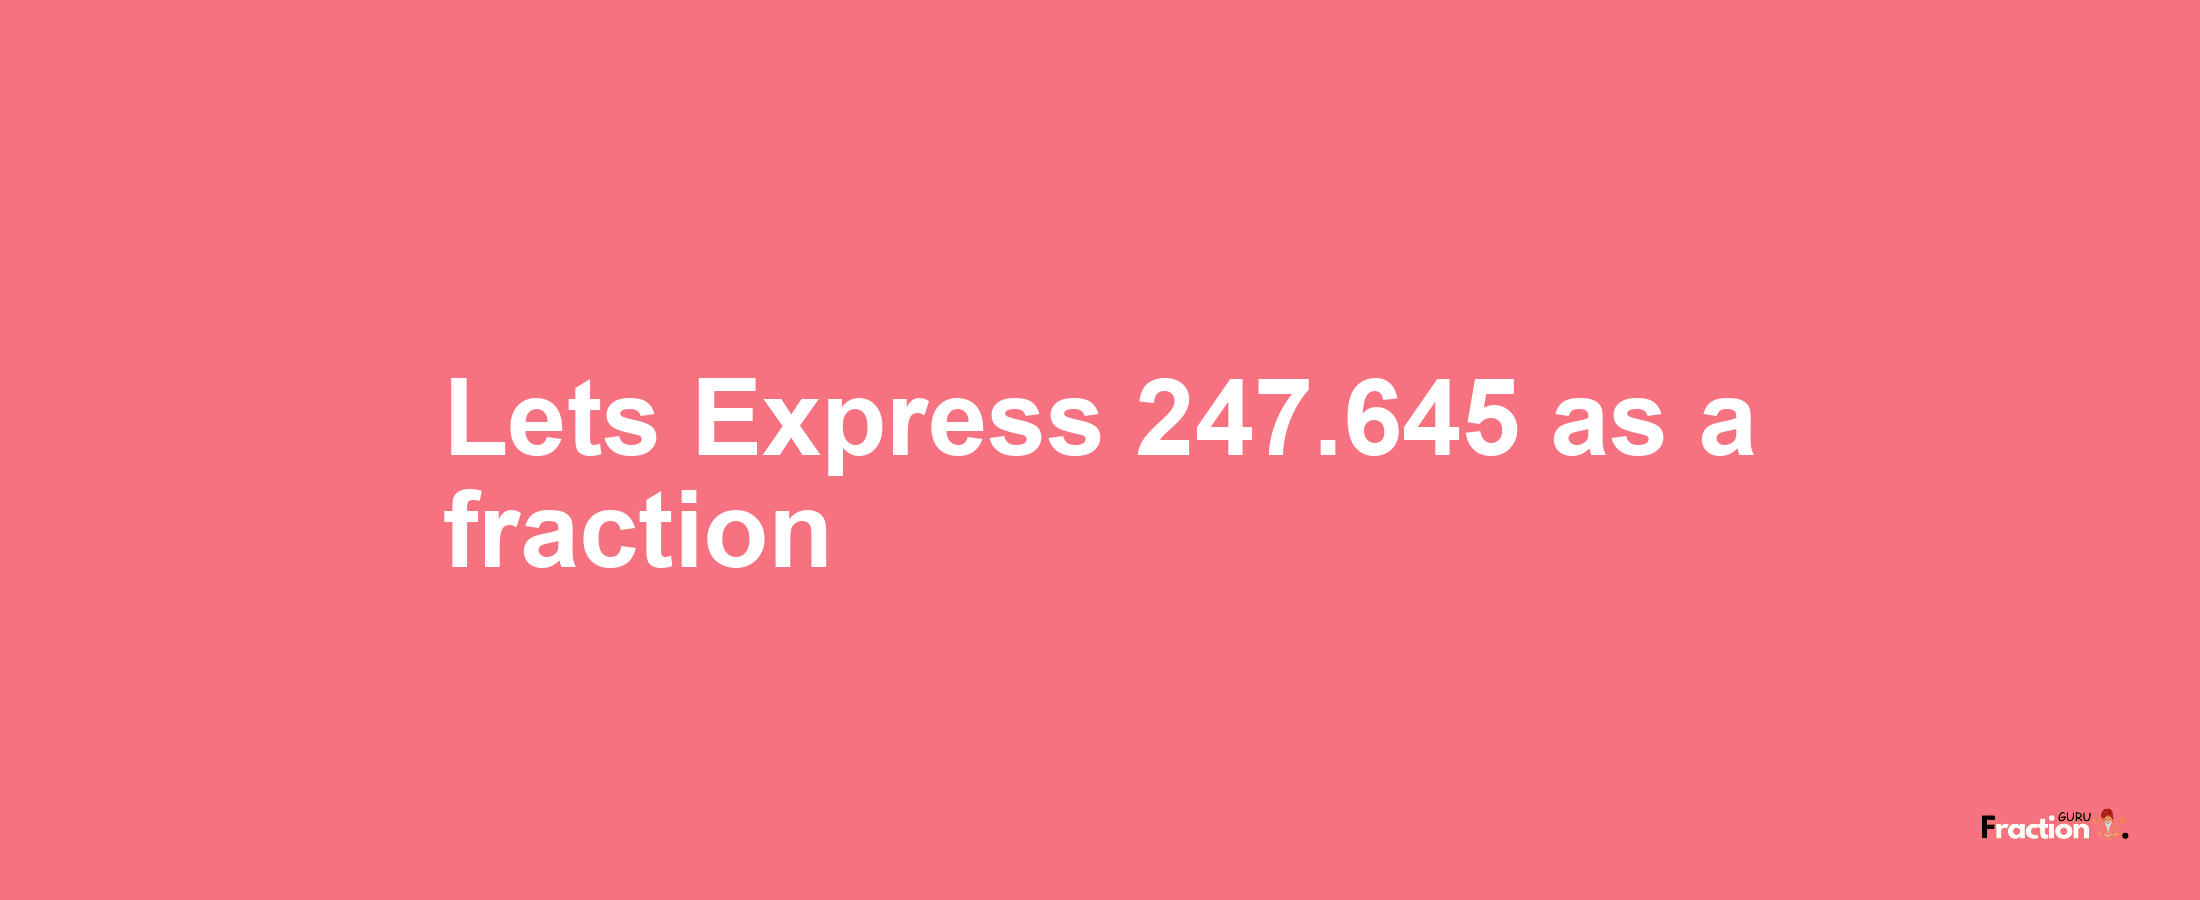 Lets Express 247.645 as afraction